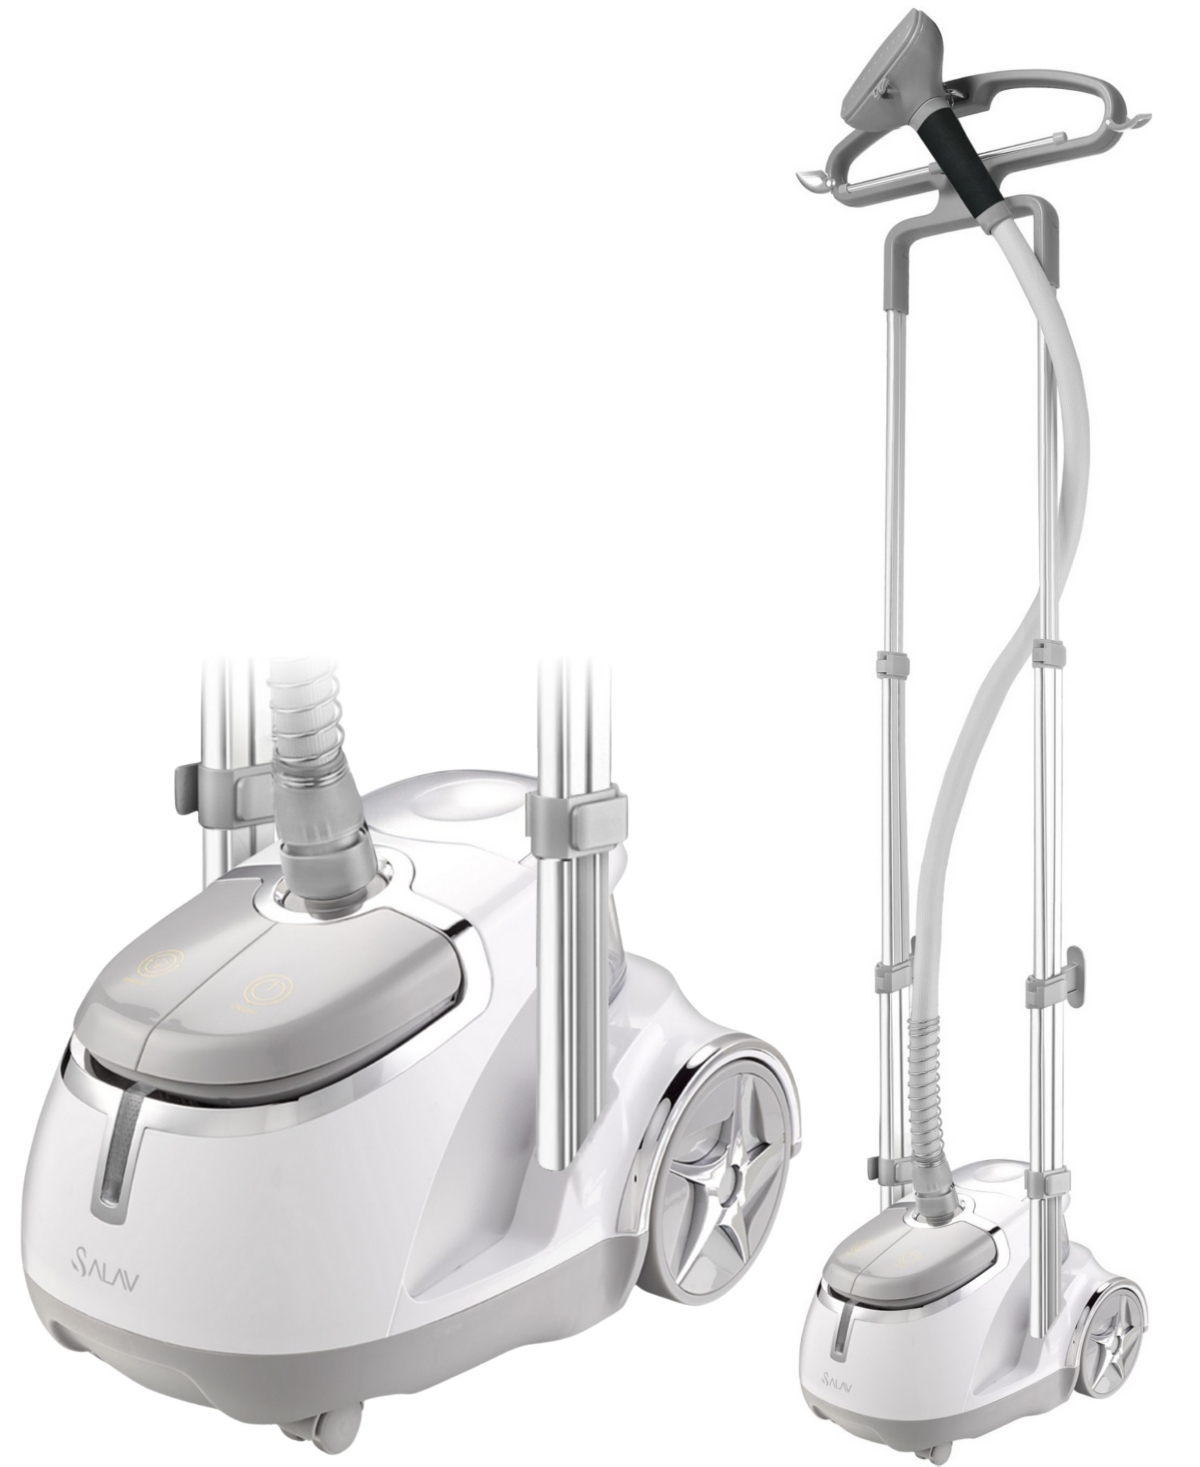 Shop Salav Professional Garment Steamer With Foot Pedal Power Control Silver